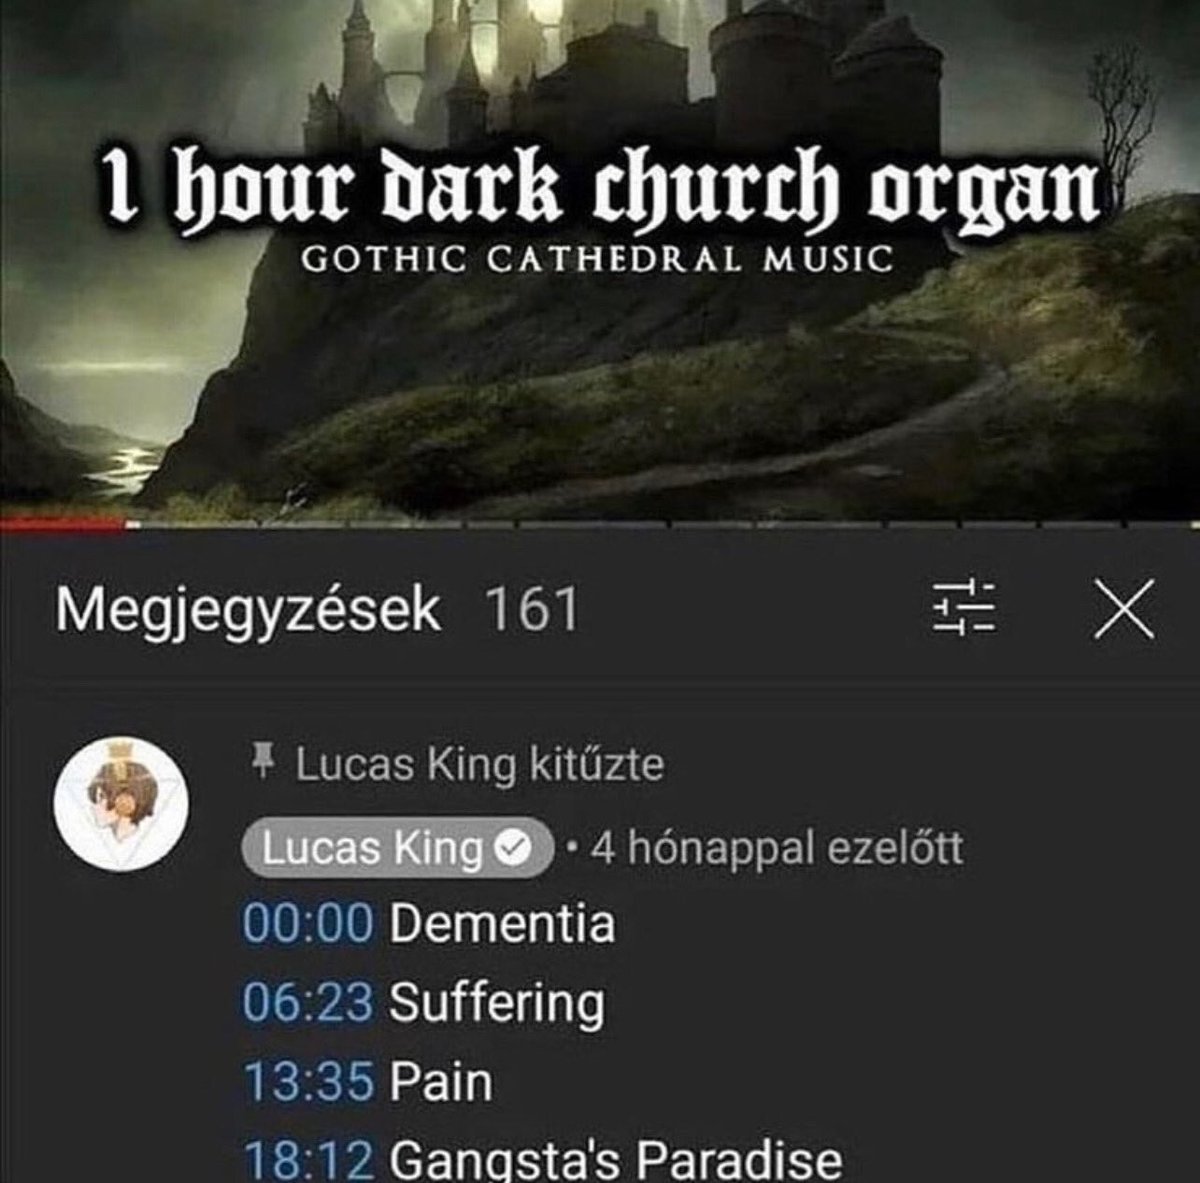 funny and savage youtube comments - dementia suffering pain gangsta's paradise - 1 hour dark church organ Gothic Cathedral Music Megjegyzsek 161 Lucas King kitzte Lucas King 4 hnappal ezeltt Dementia Suffering Pain Gangsta's Paradise